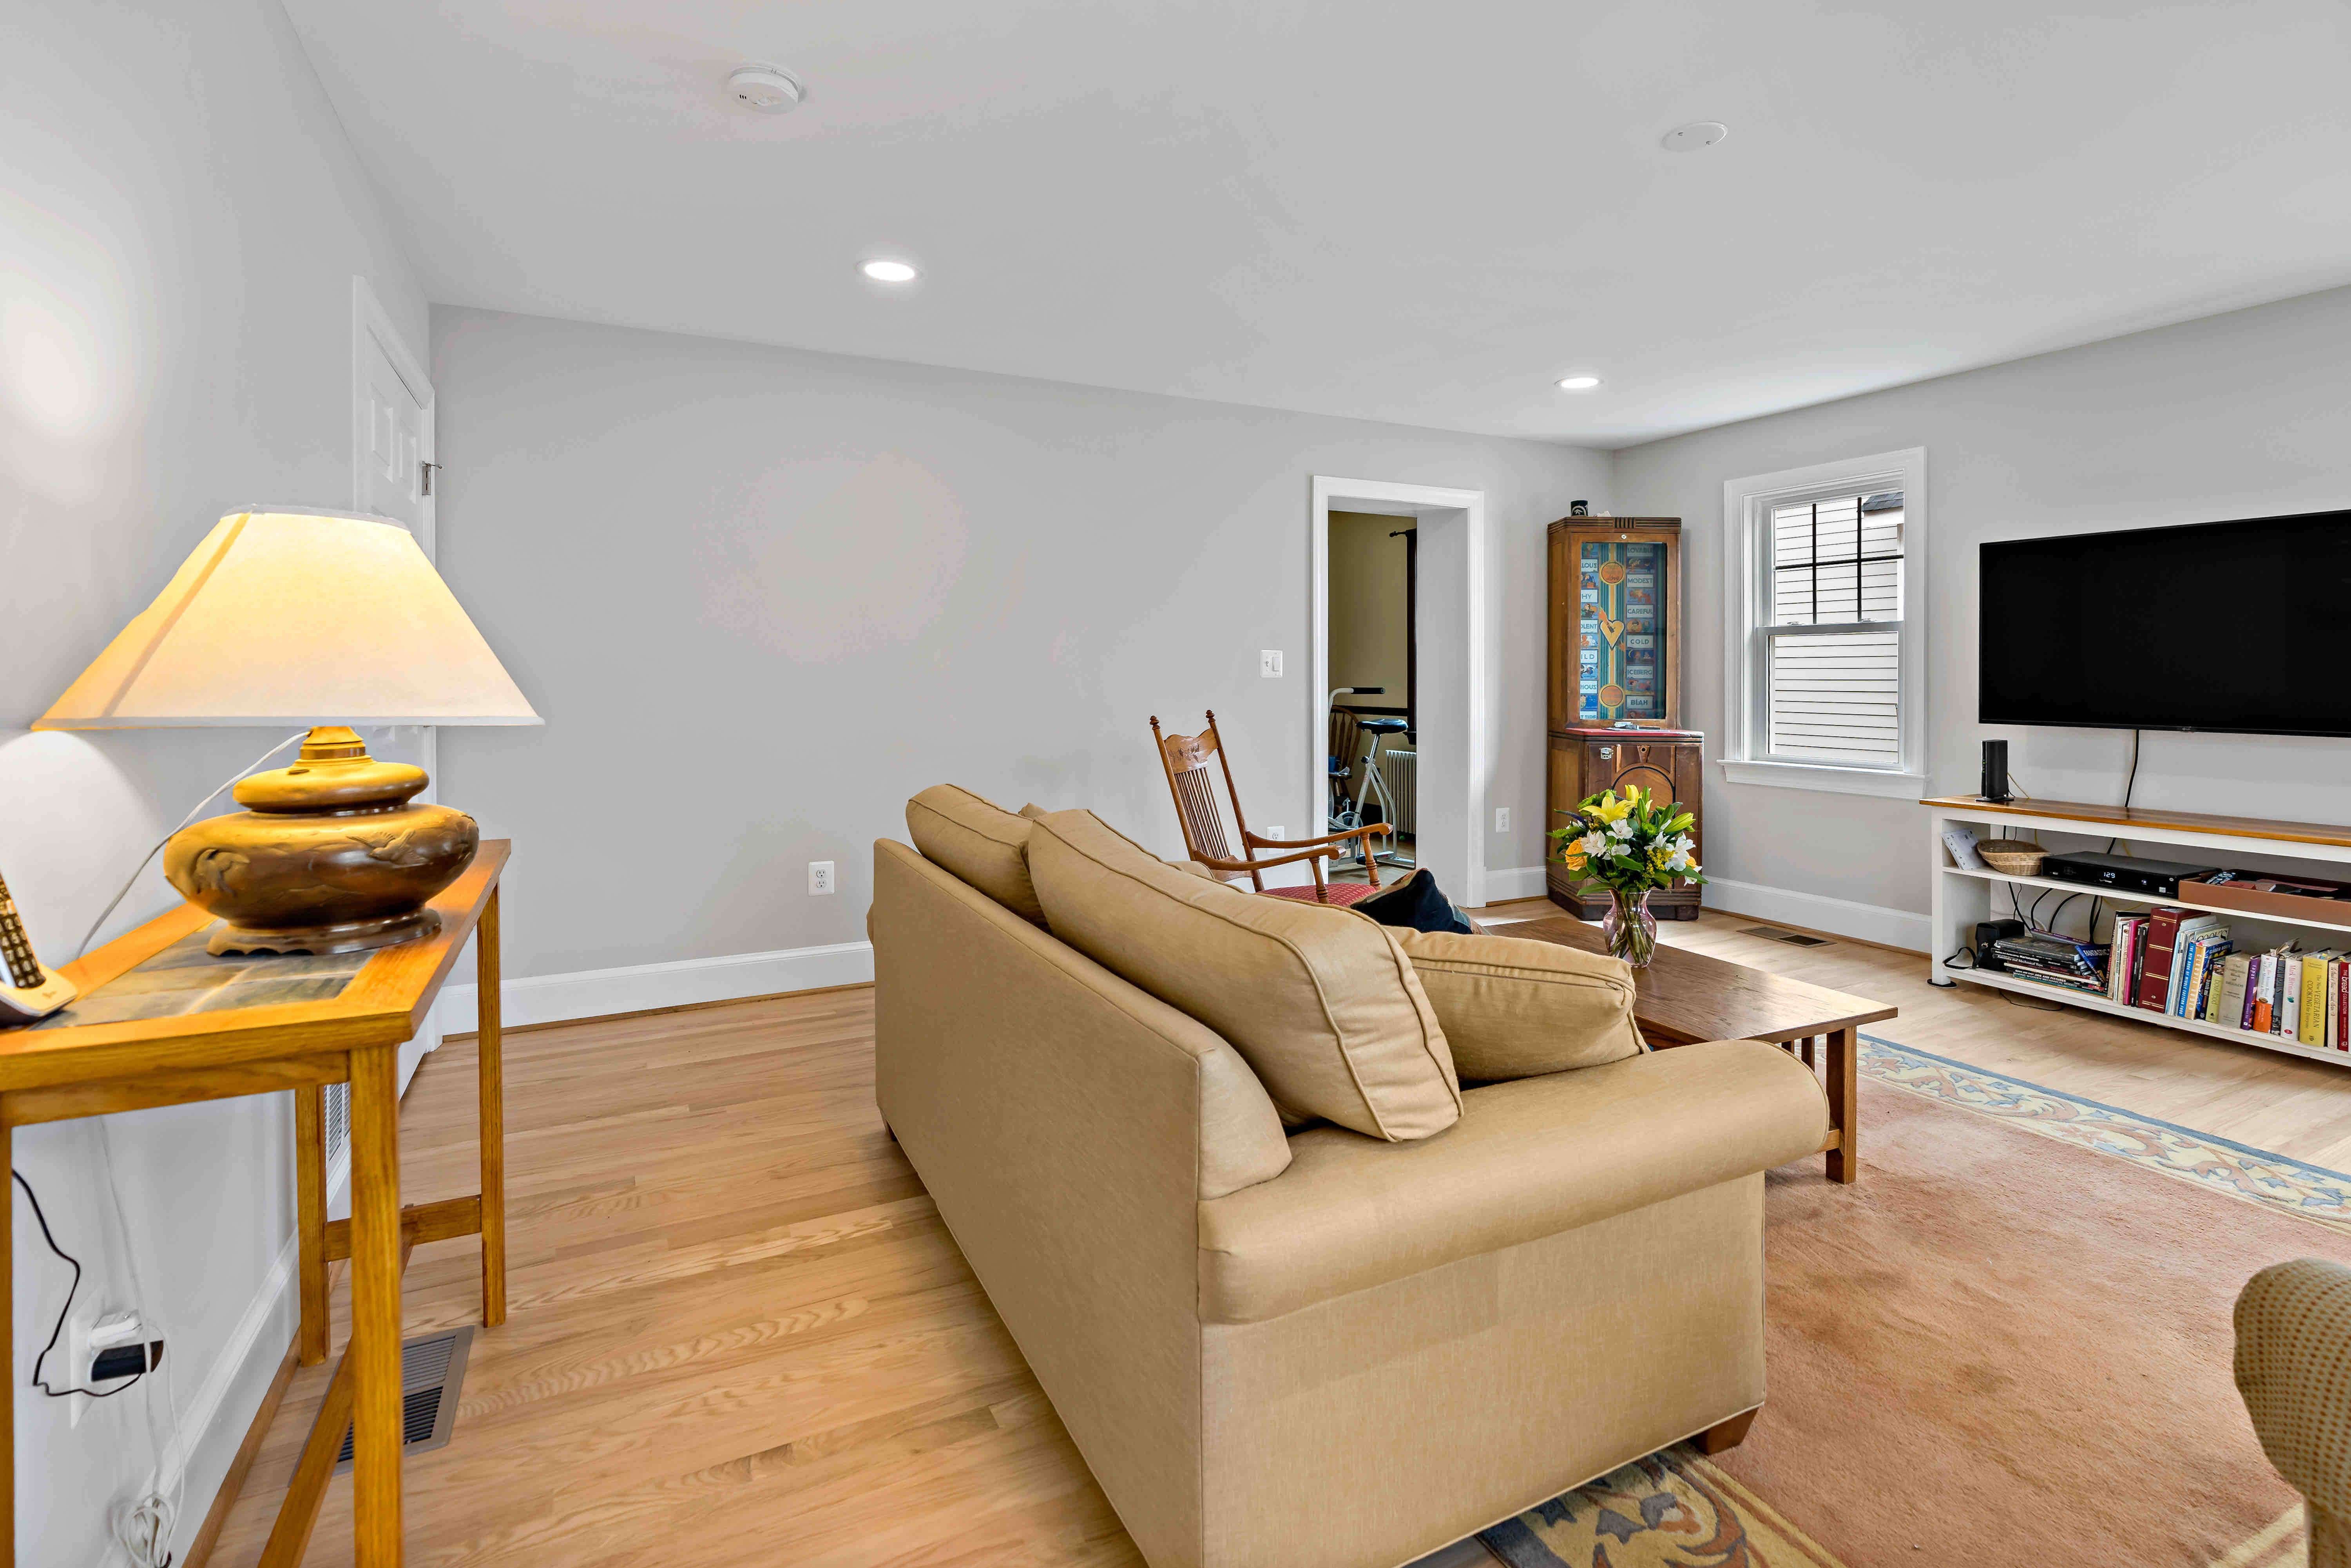 Entertainment room with hardwood floors and white walls